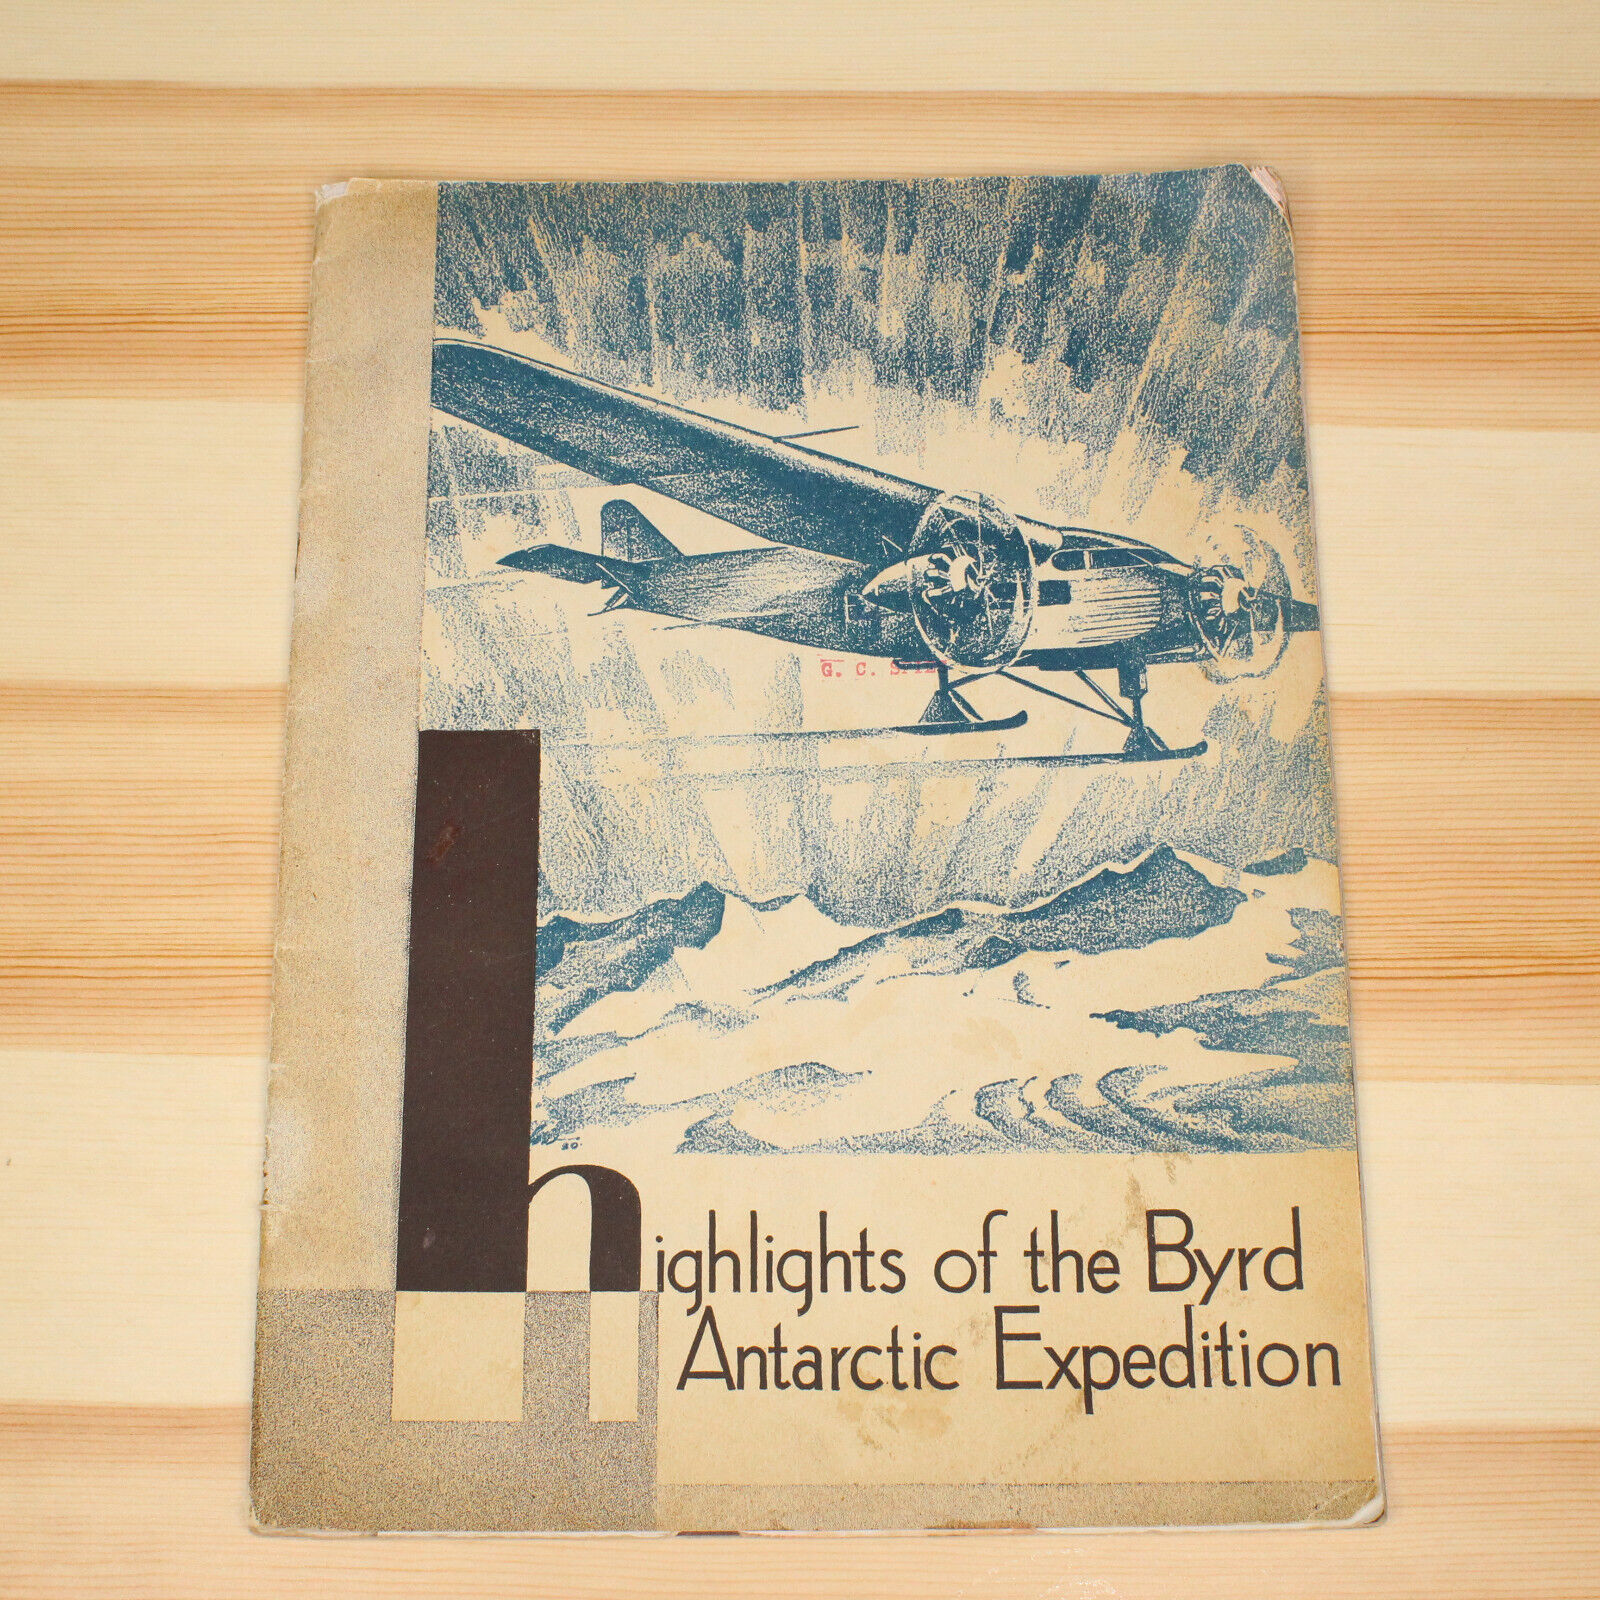 Highlights of the Byrd Antarctic Expedition Booklet Copyright 1930